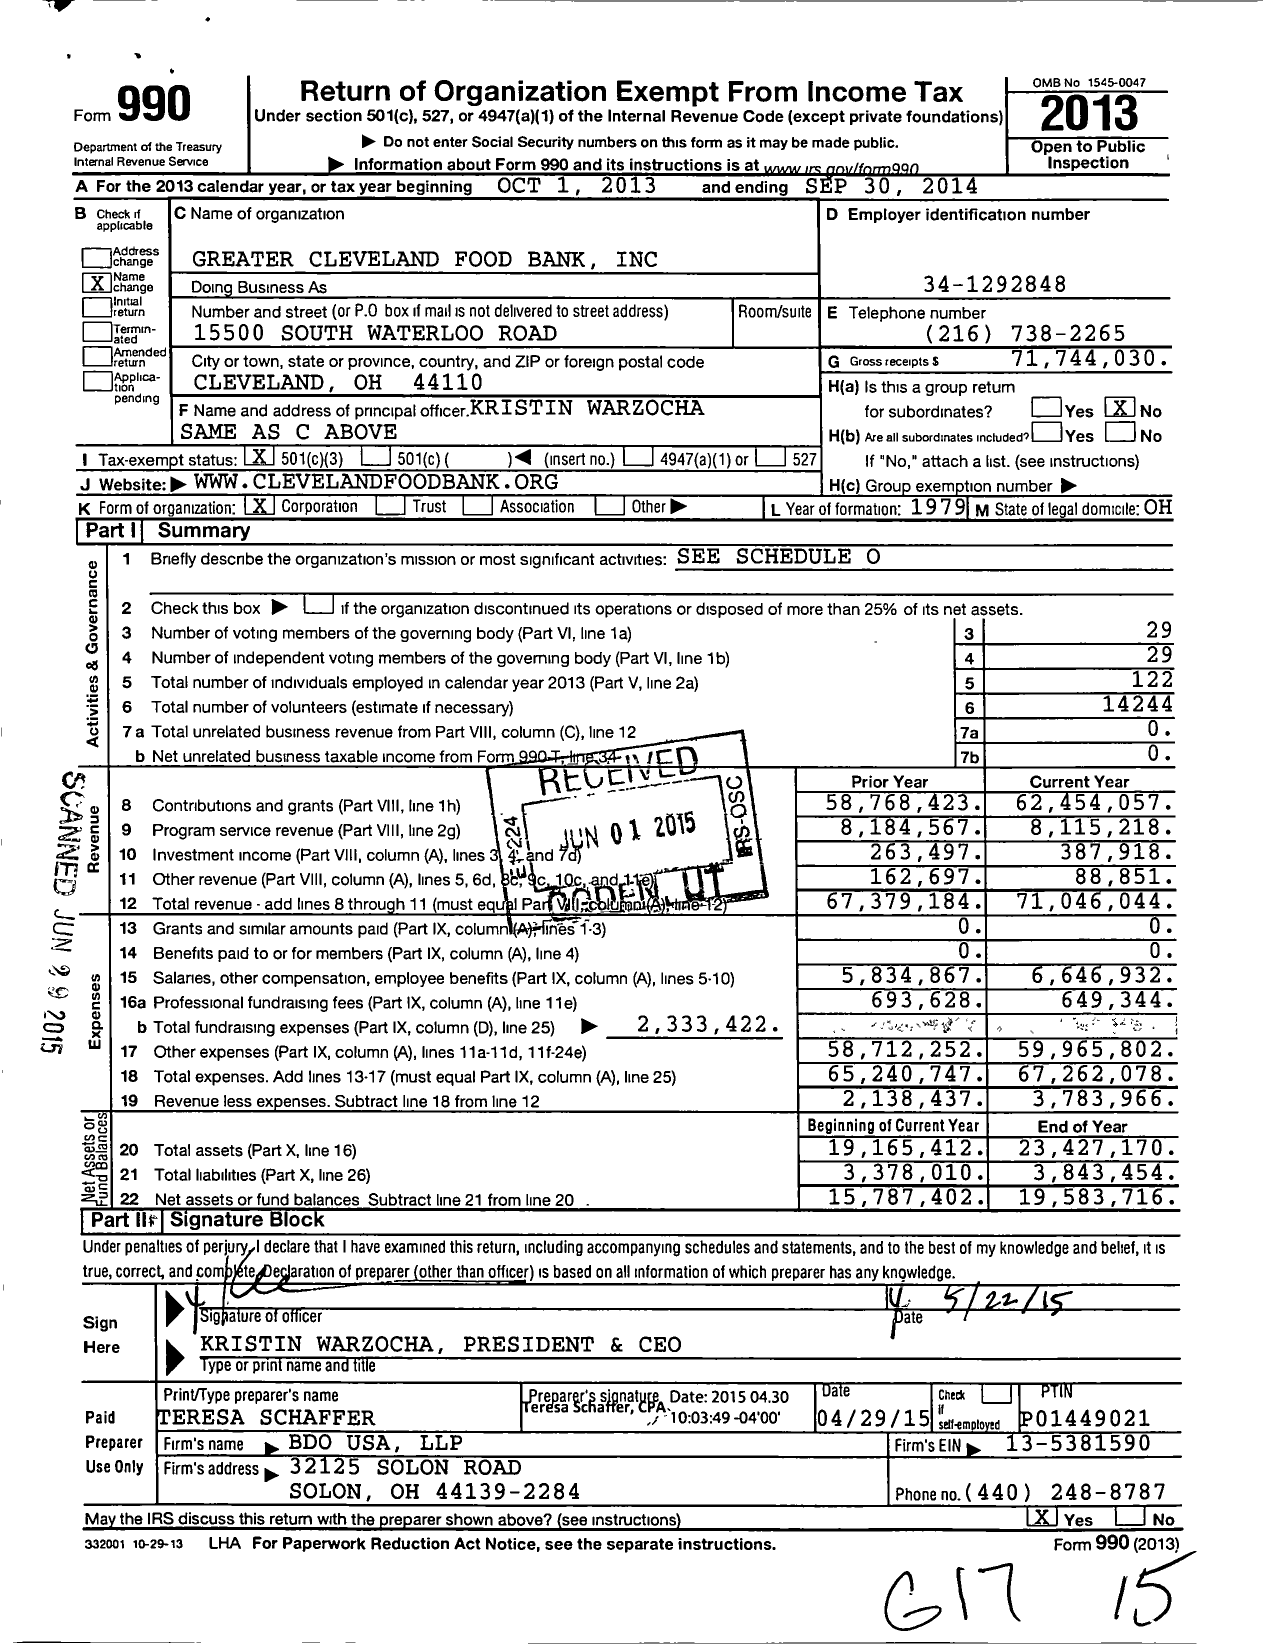 Image of first page of 2013 Form 990 for Greater Cleveland Food Bank